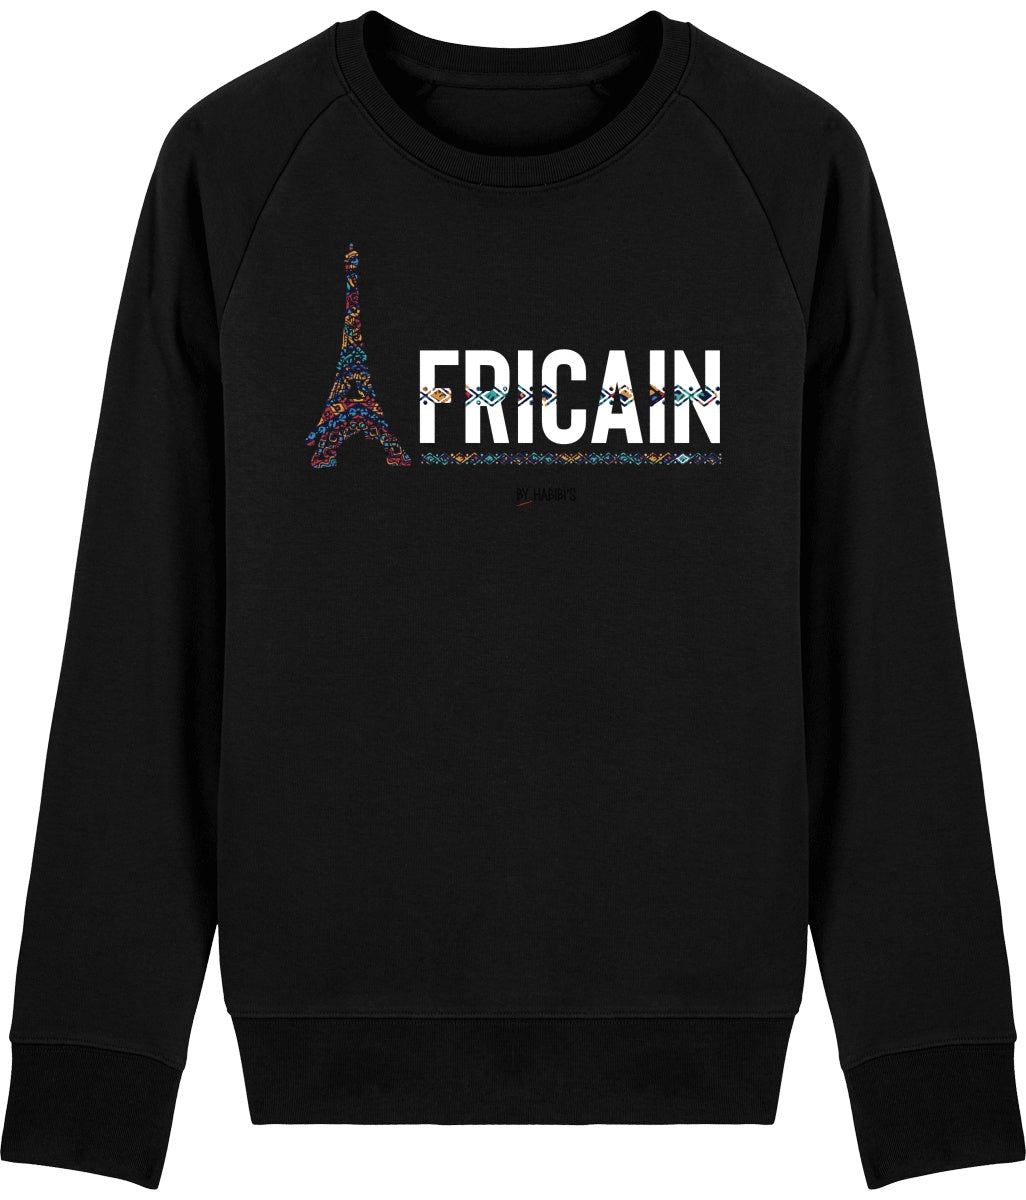 Sweat Homme Africain